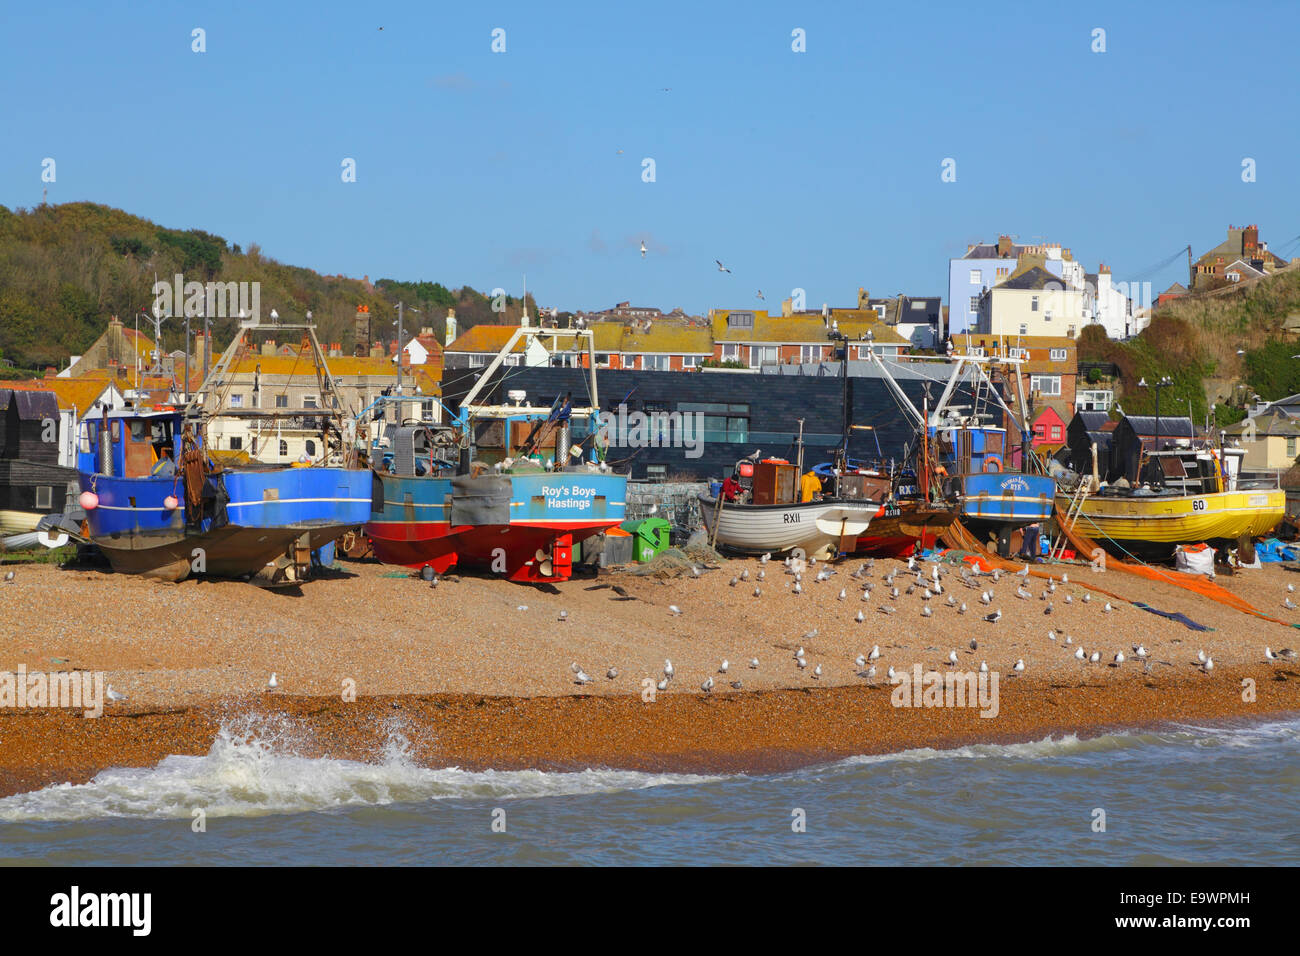 Hastings fishing trawlers on the Old Town Stade beach in front of the Hastings Contemporary Art Gallery,  East Sussex, England, UK. Stock Photo